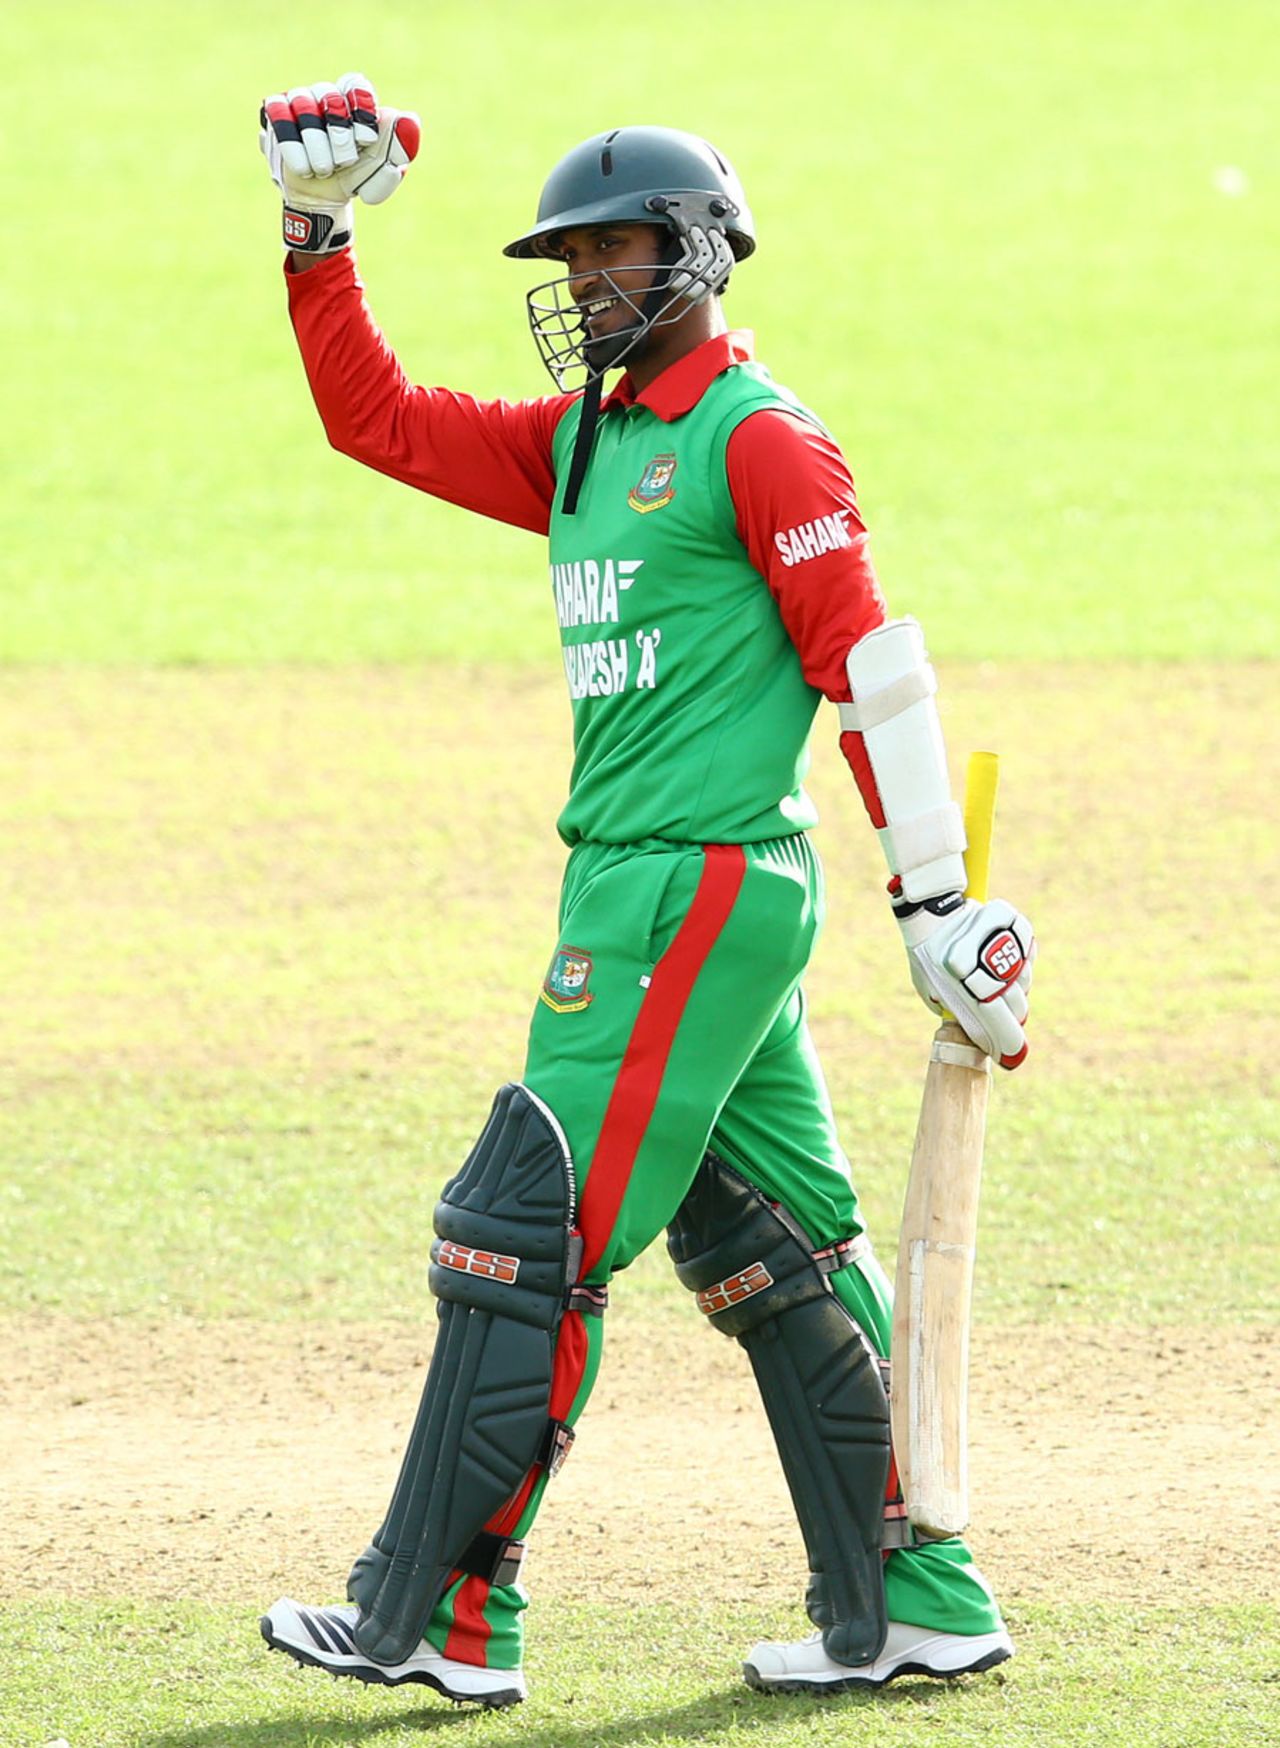 Naeem Islam's unbeaten hundred secured victory, England Lions v Bangladesh A, 3rd unofficial ODI, Taunton, August 24, 2013